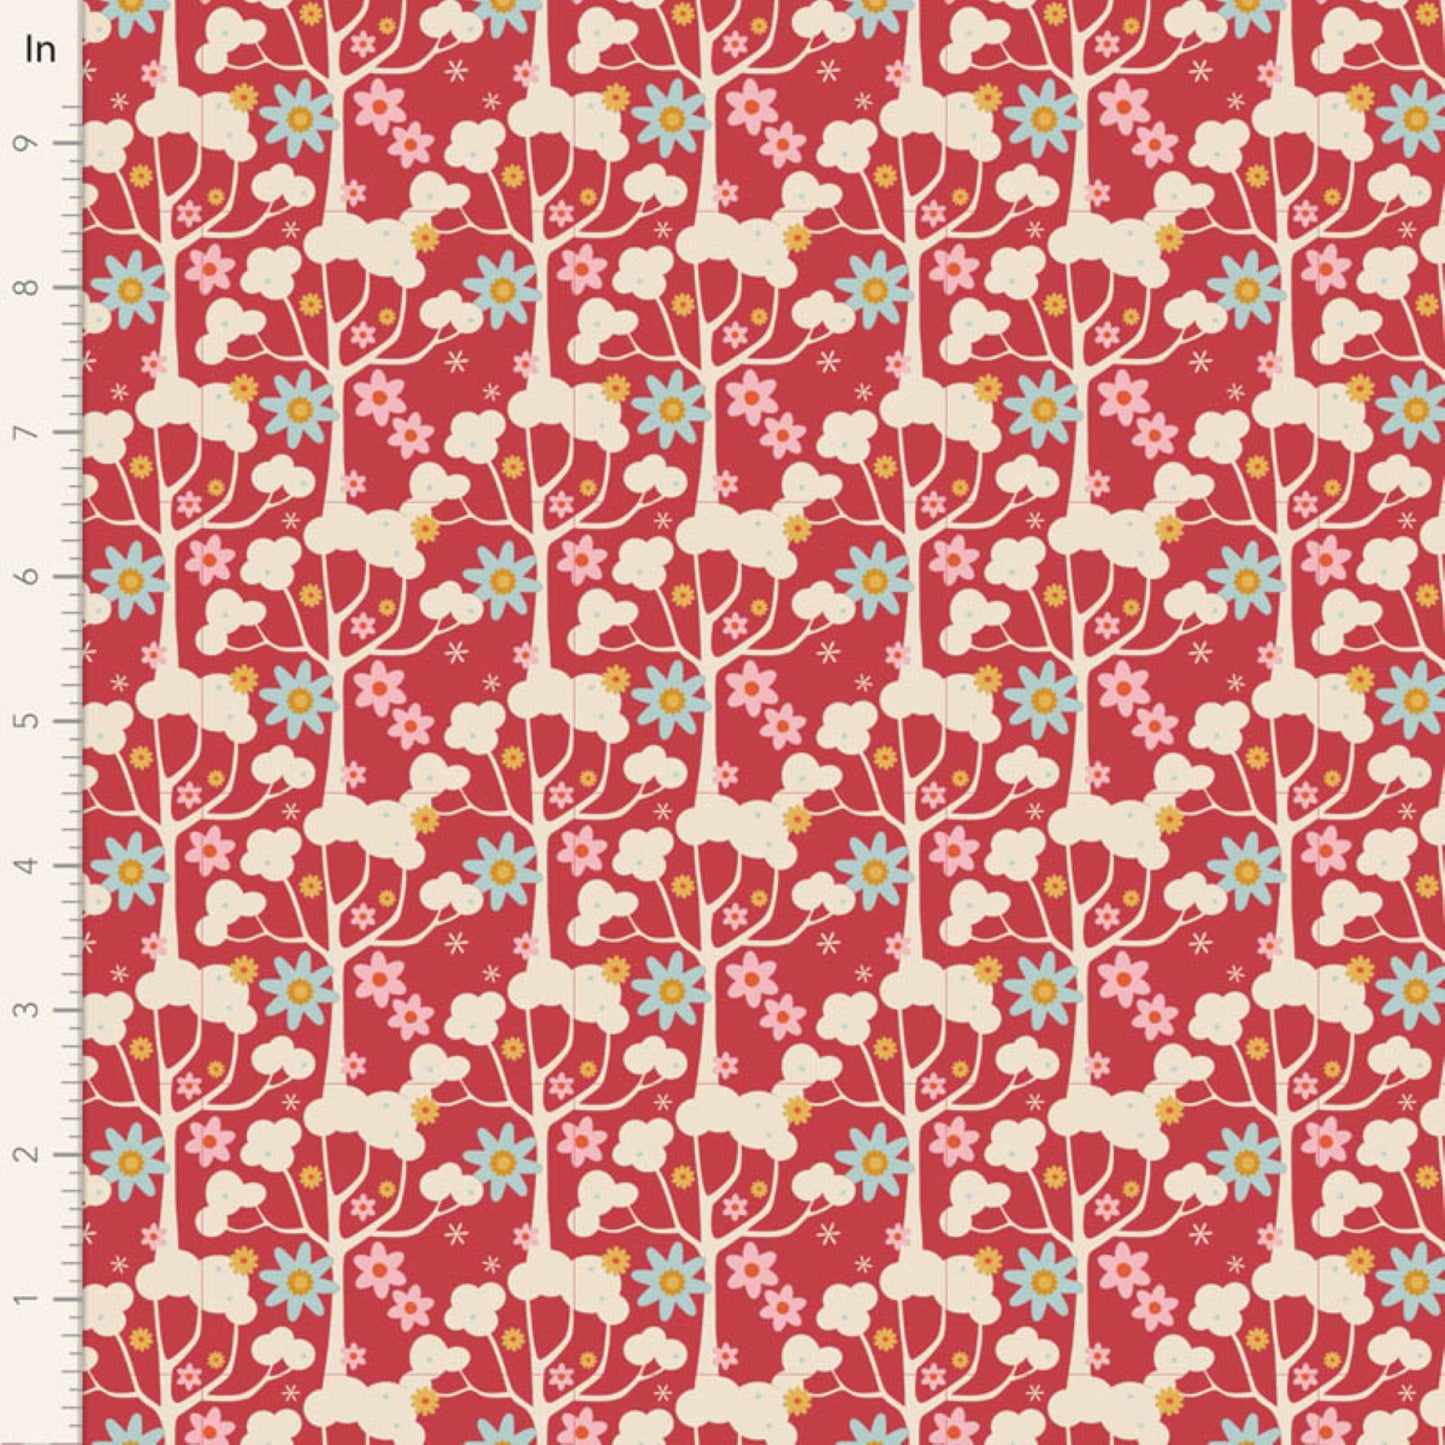 Tilda Jubilee Wildgarden red floral trees cotton quilt fabric by the FQ + MORE